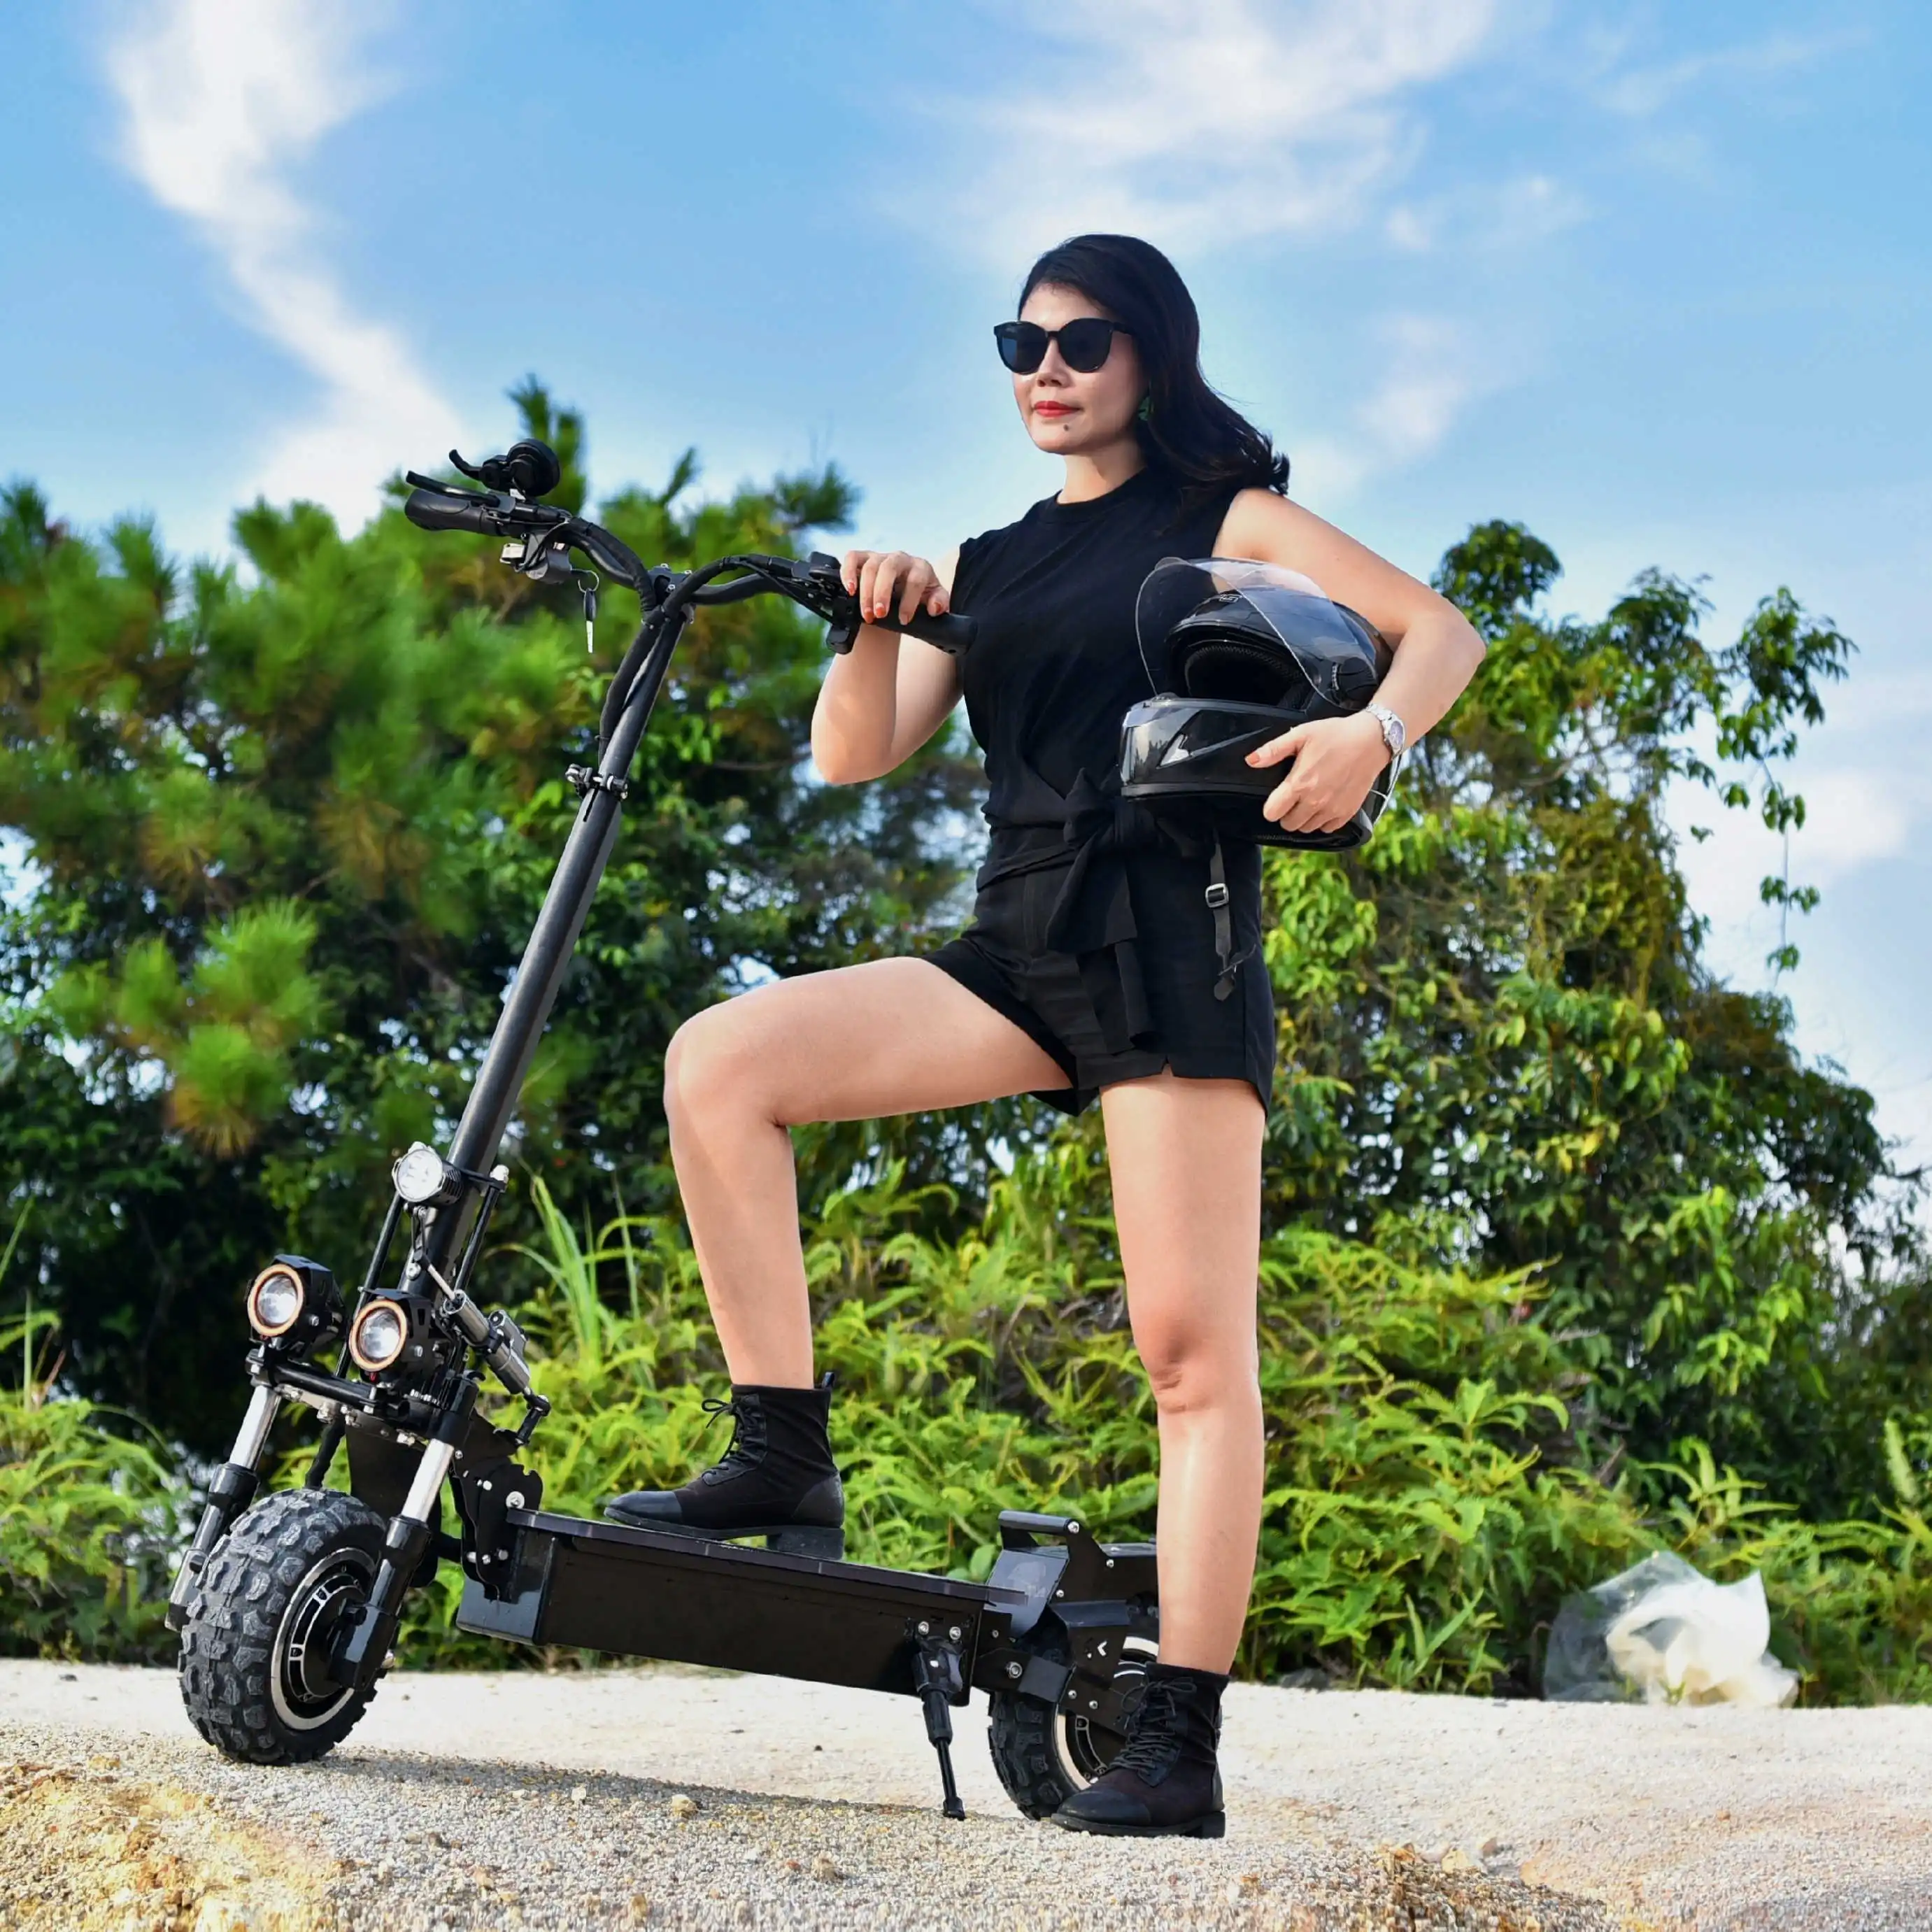 

Maike MK8 11inch 60V 5000W dual motor foldable adults electrical scooter electric scooters